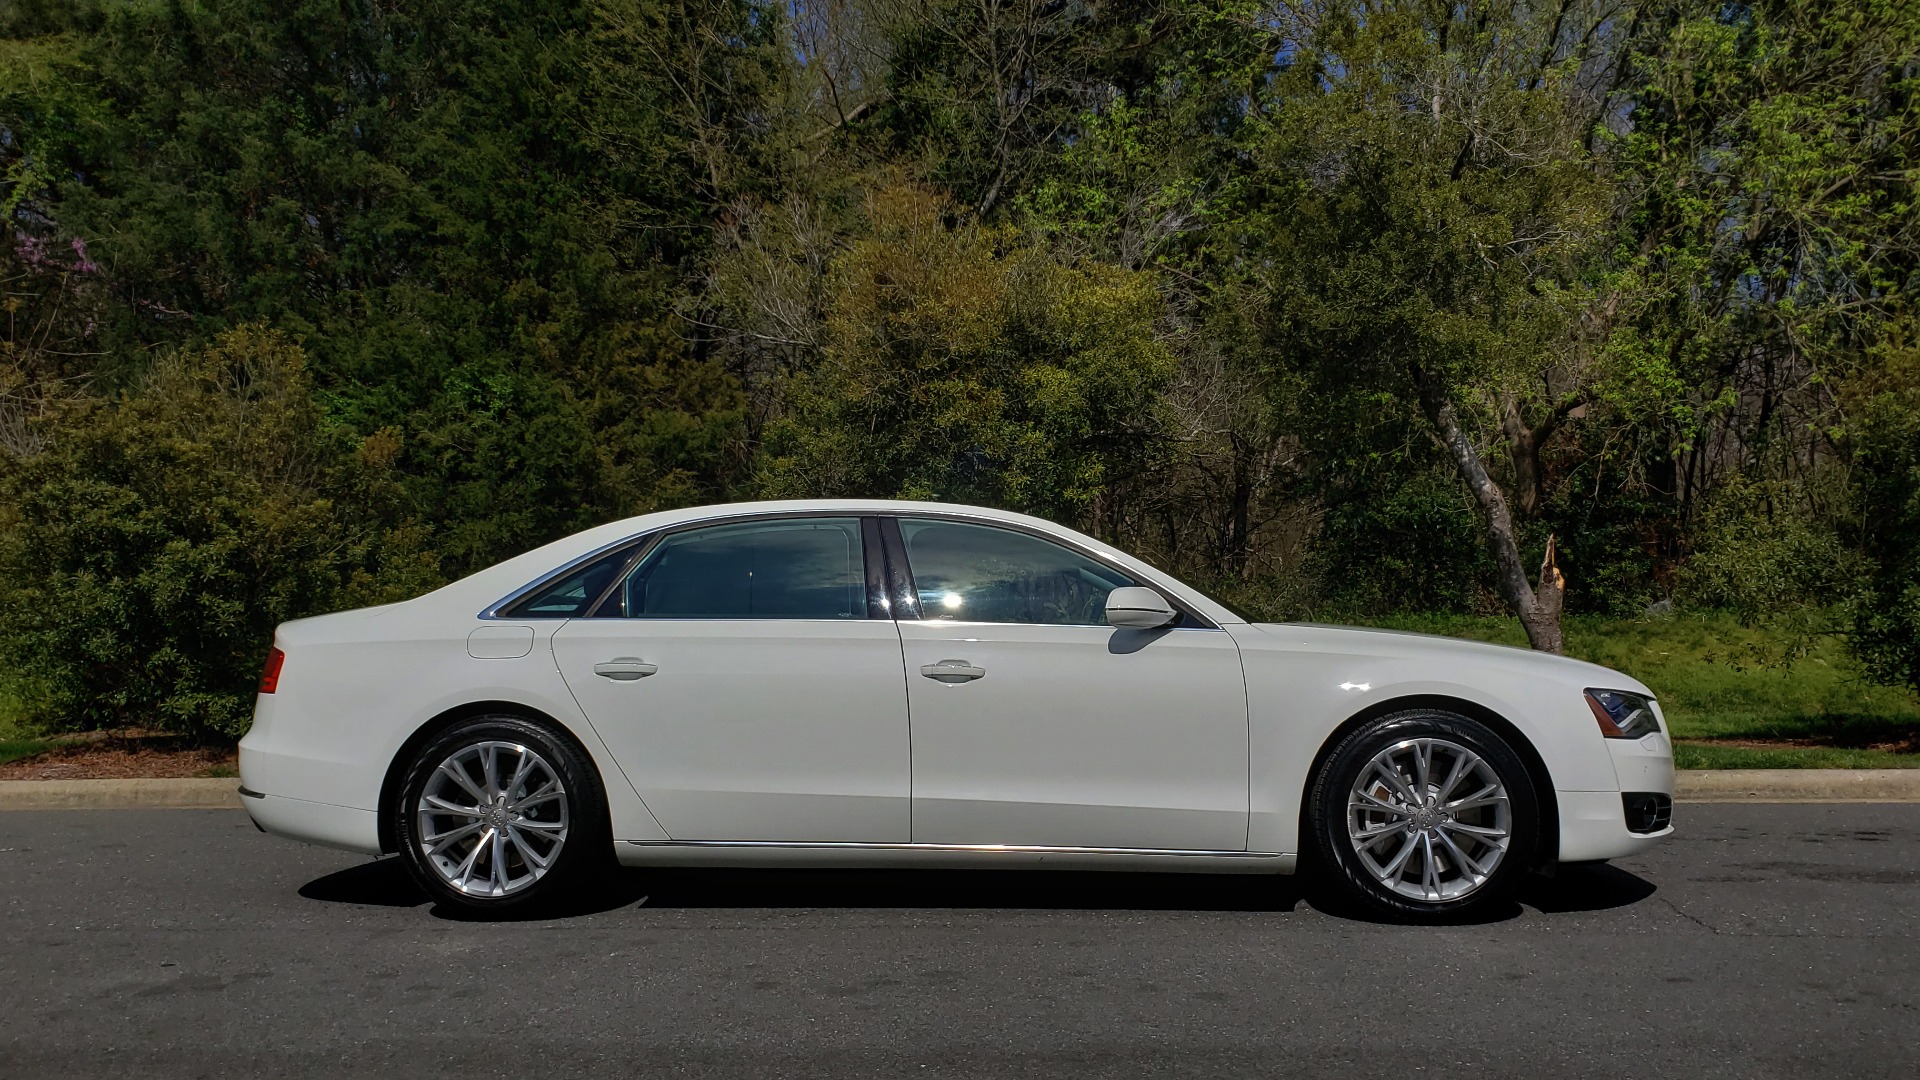 Used 2011 Audi A8 L QUATTRO / NAV / PANO-ROOF / REARVIEW / BSM / B&O SND for sale Sold at Formula Imports in Charlotte NC 28227 5